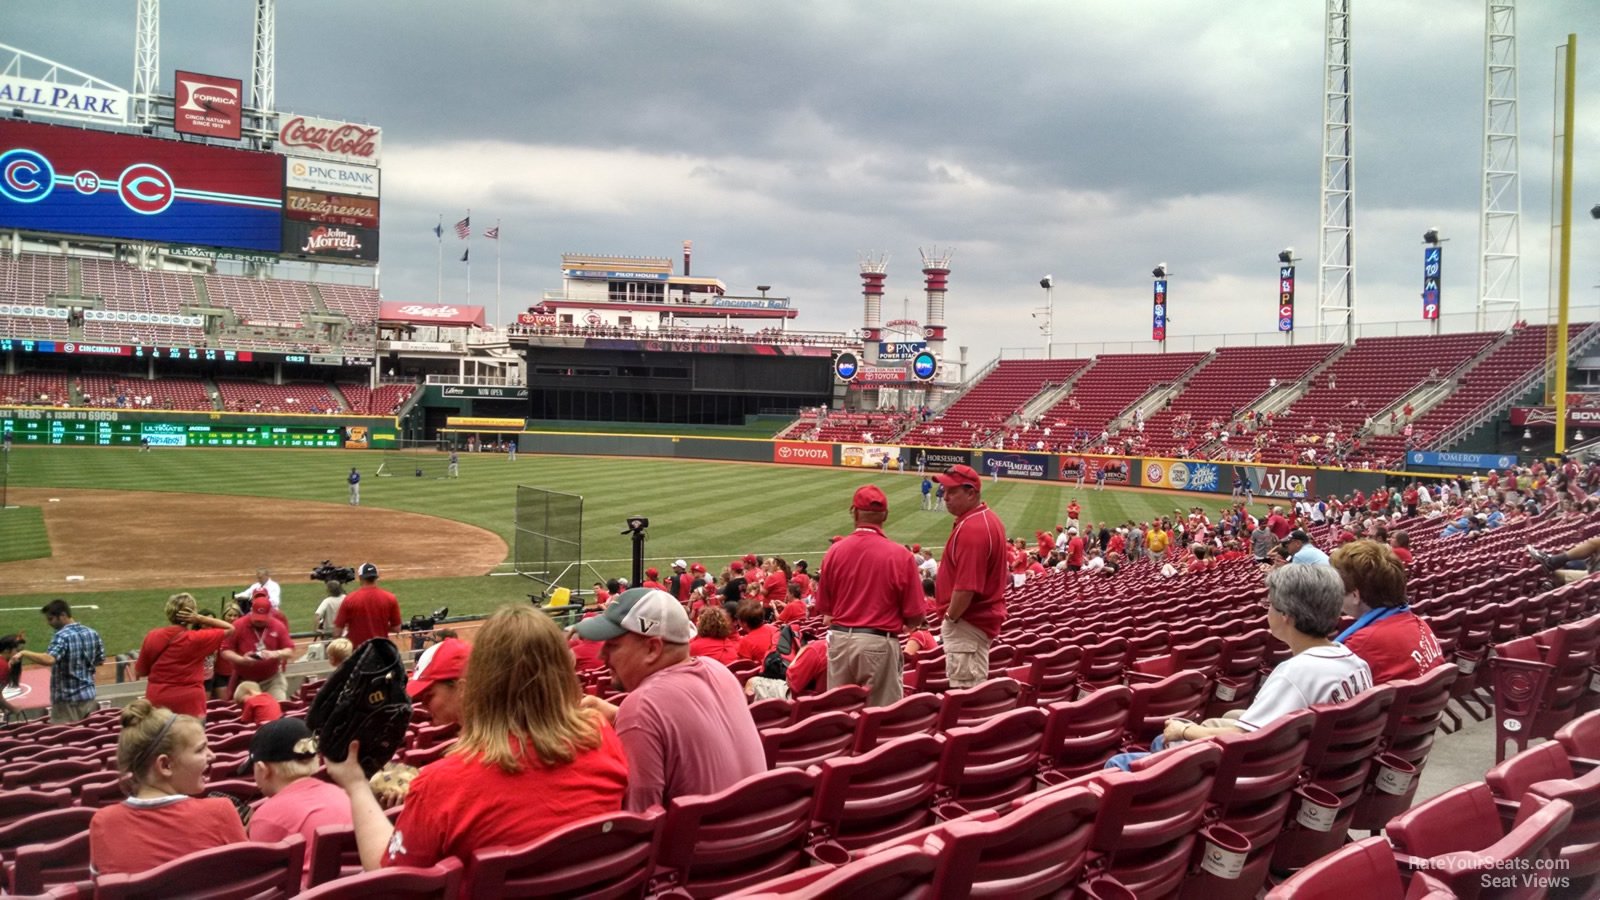 Reds Great American Ballpark Seating Chart